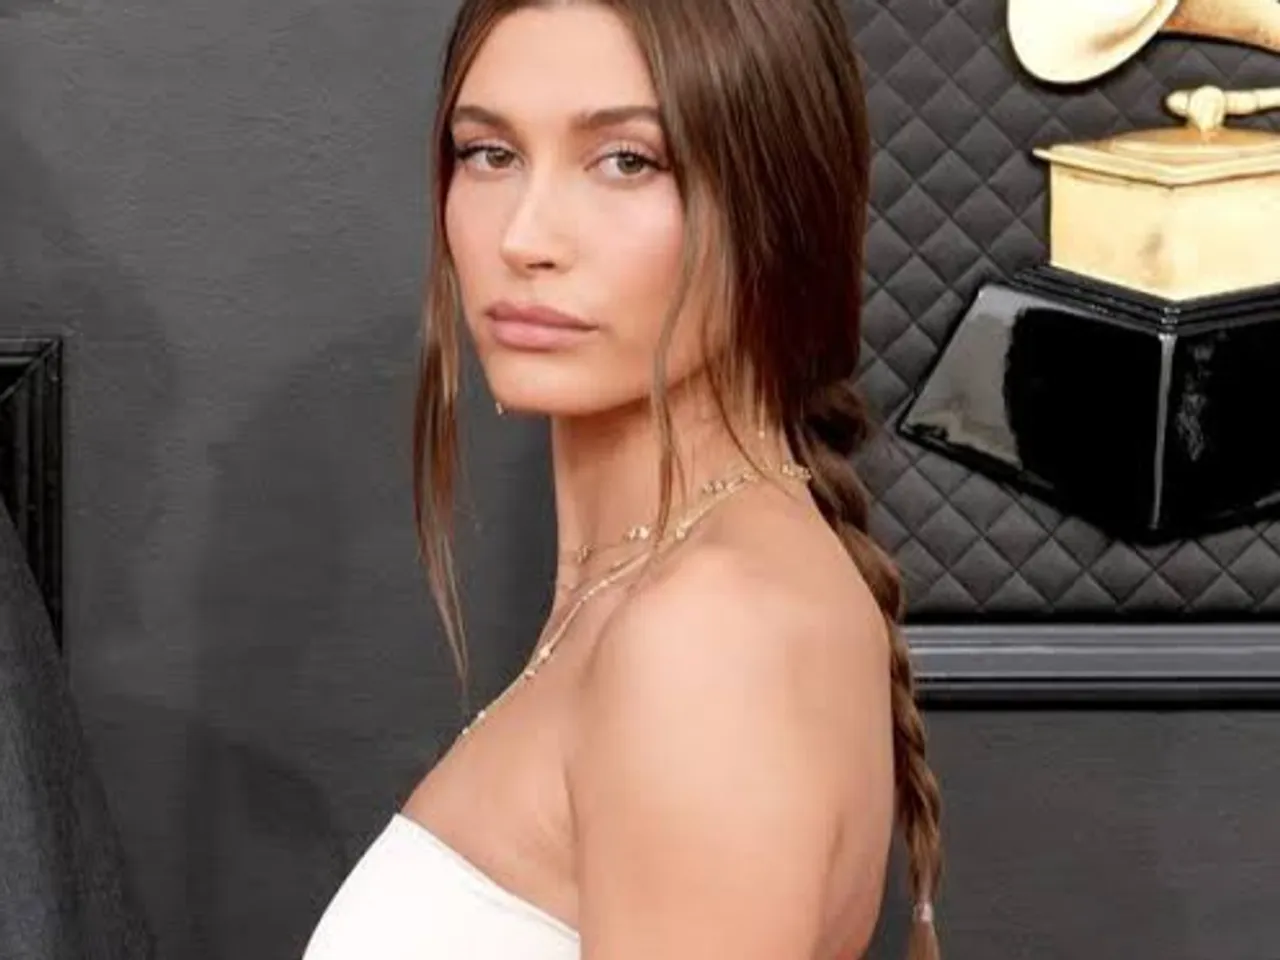 Hailey Bieber says 'Leave me alone!' when asked about pregnancy rumours at Grammys 2022